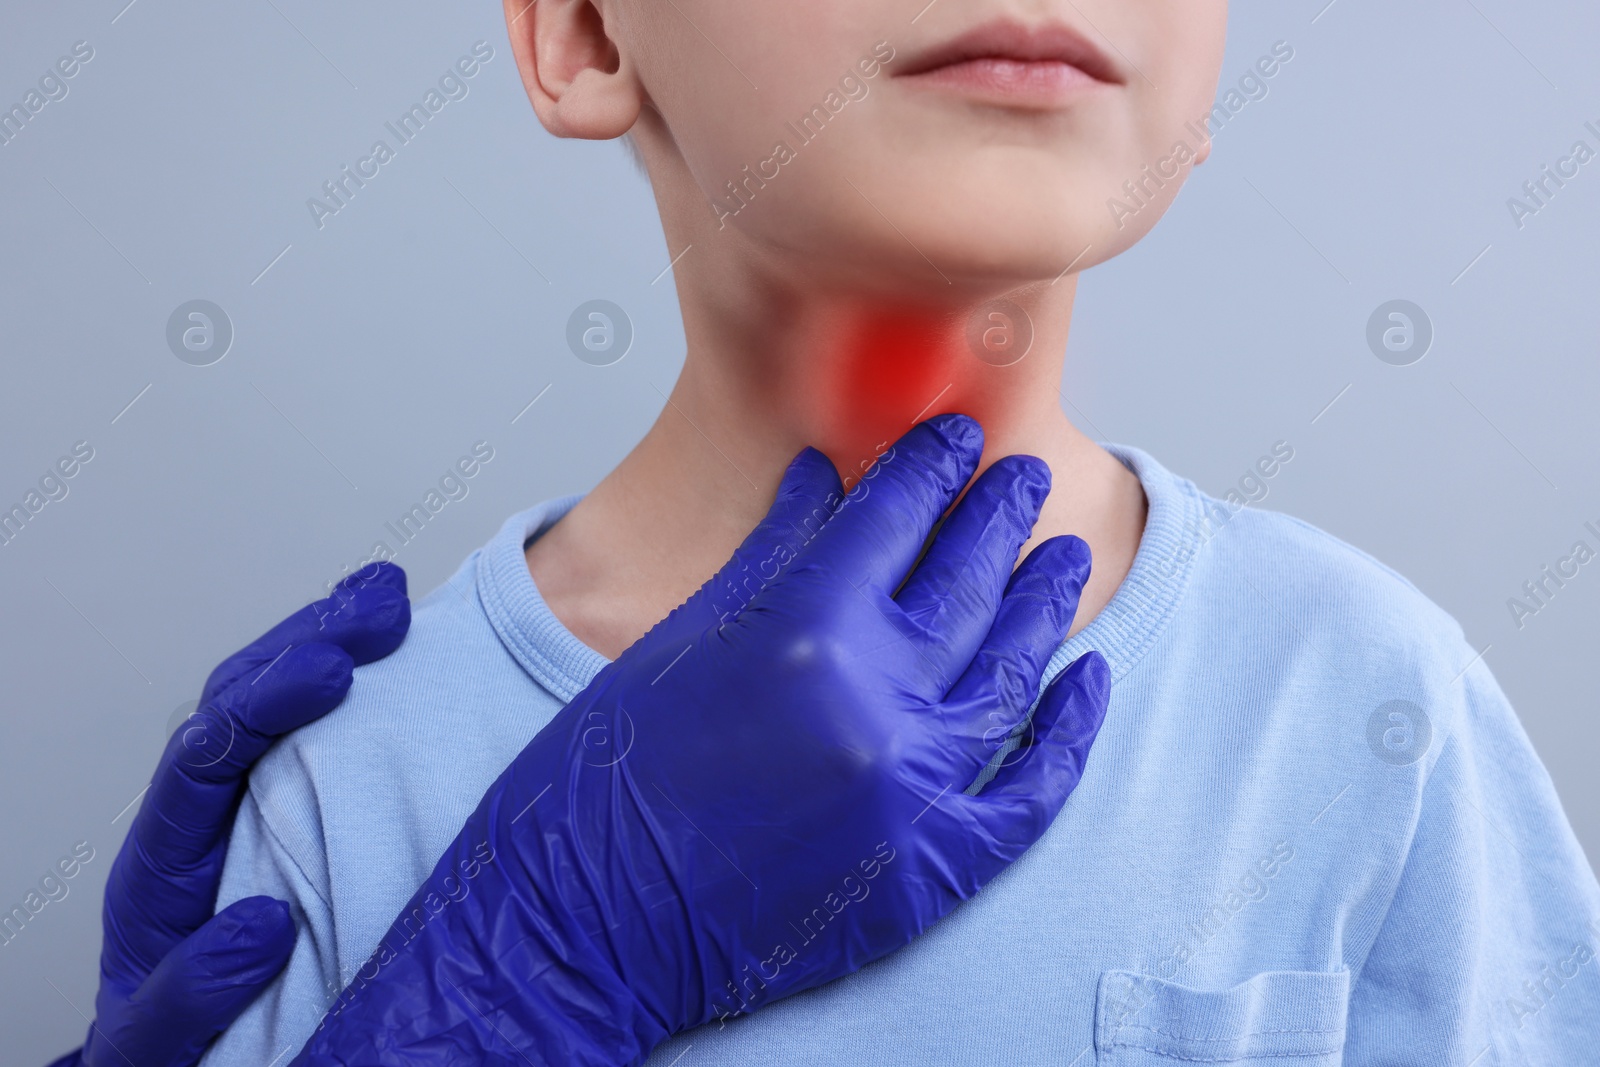 Image of Endocrinologist examining thyroid gland of patient on grey background, closeup